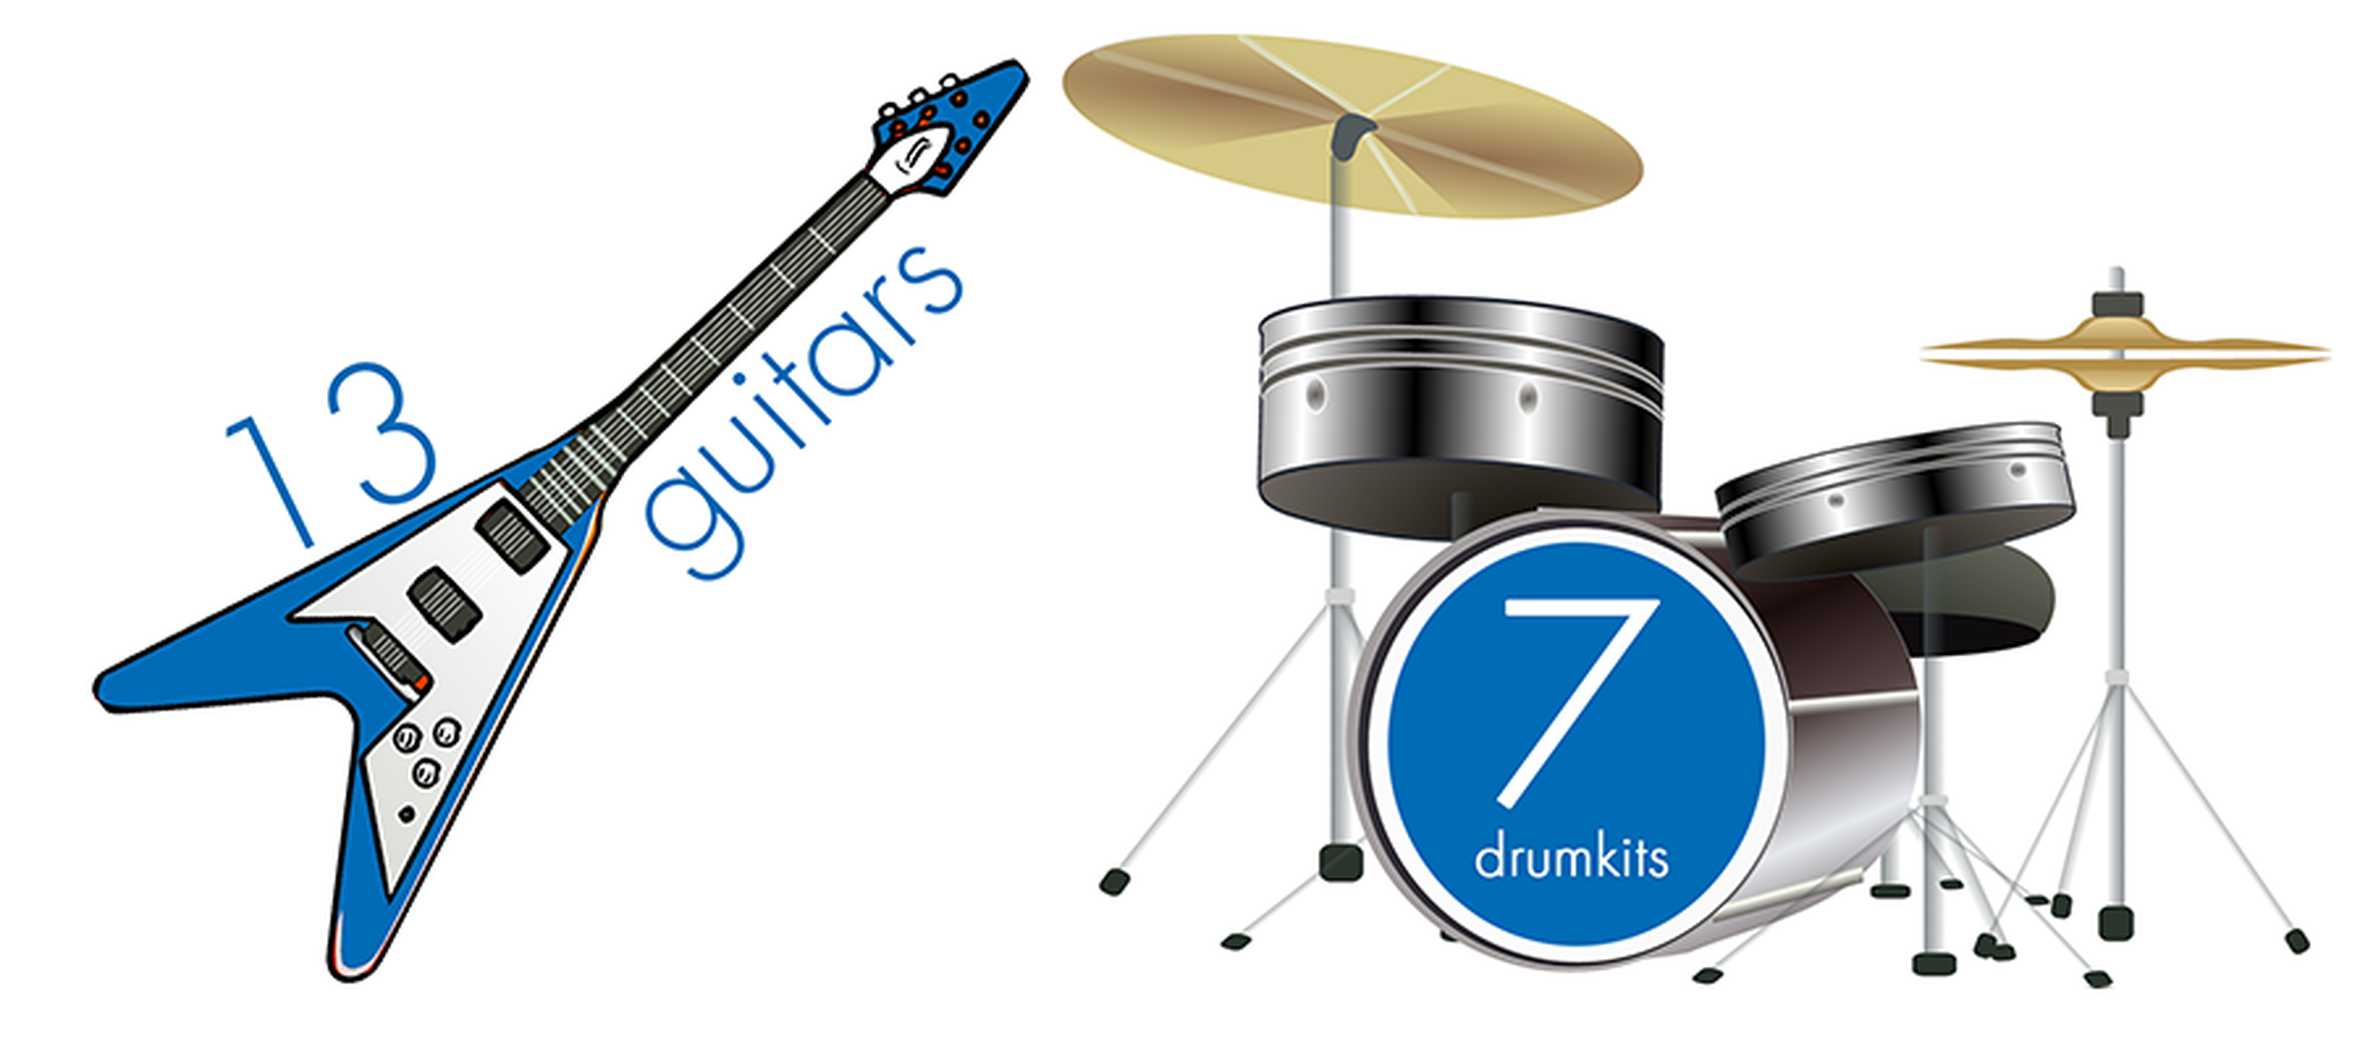 Cartoon of a guitar and drum kit